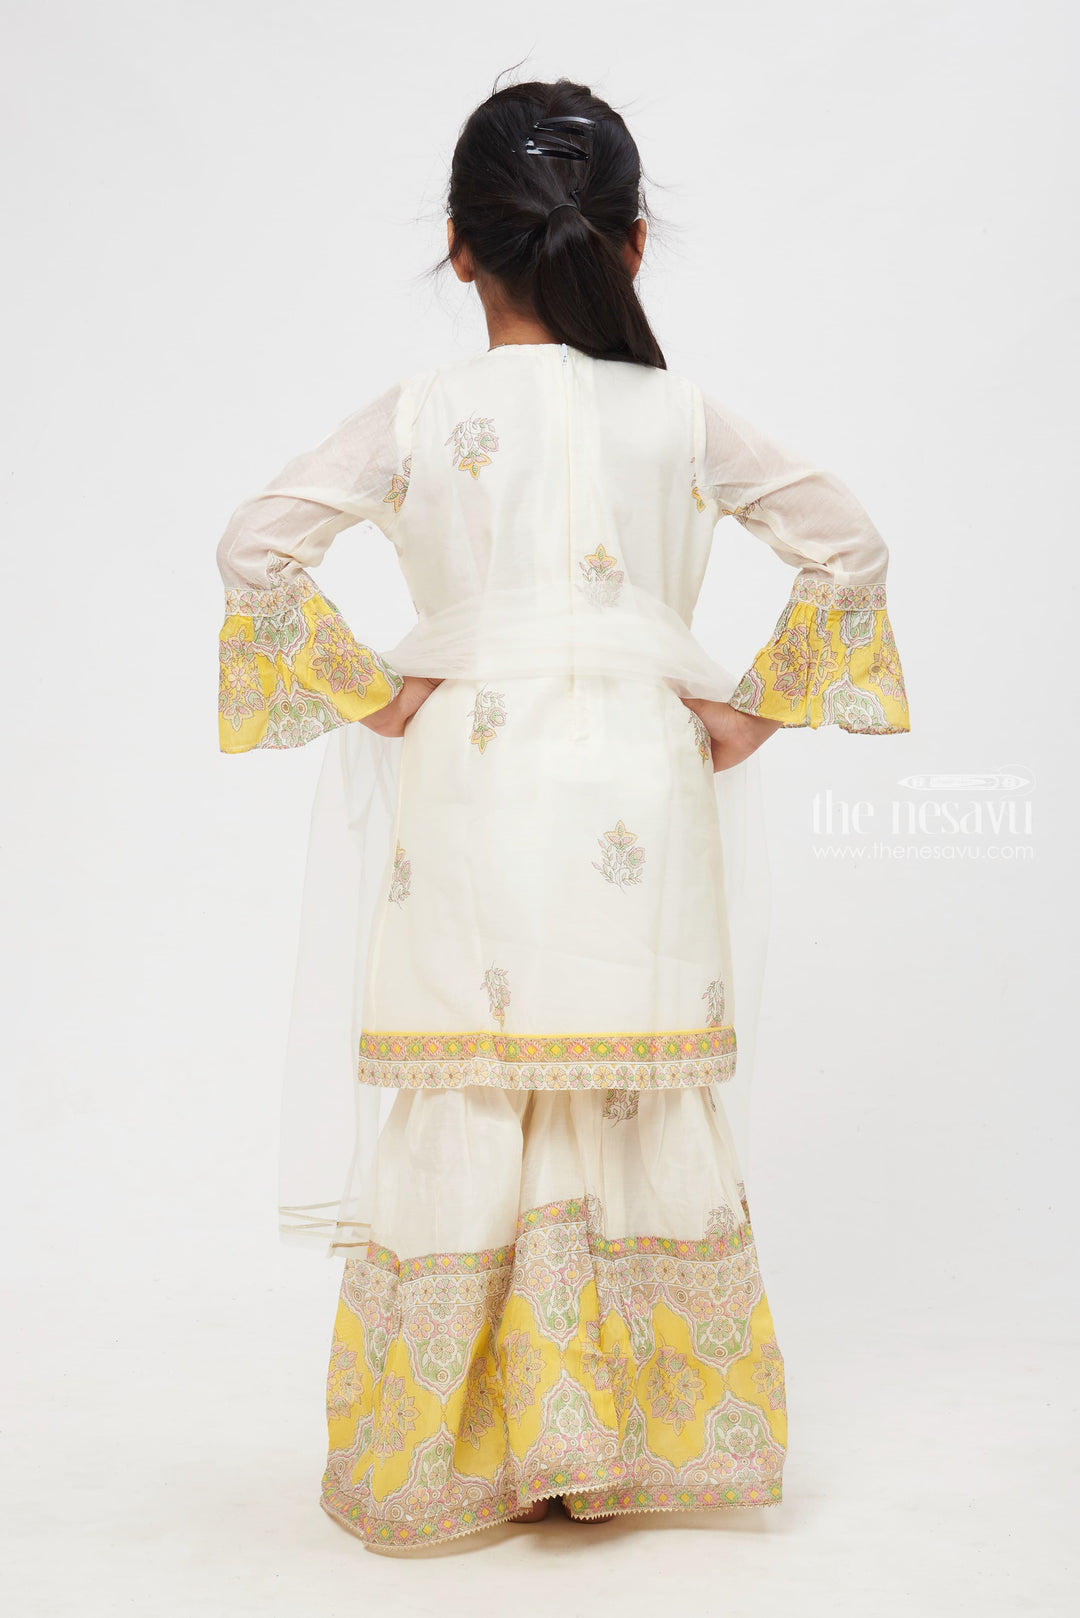 The Nesavu Girls Sharara / Plazo Set Elegant Medallion Print Ensemble for Kids: White and Yellow Floral Printed Stylish Kurti with Sharara Pant Set Nesavu Kids Elegant Medallion Print Ensemble | Classic Design with Floral Accents | Festive Wear for Children